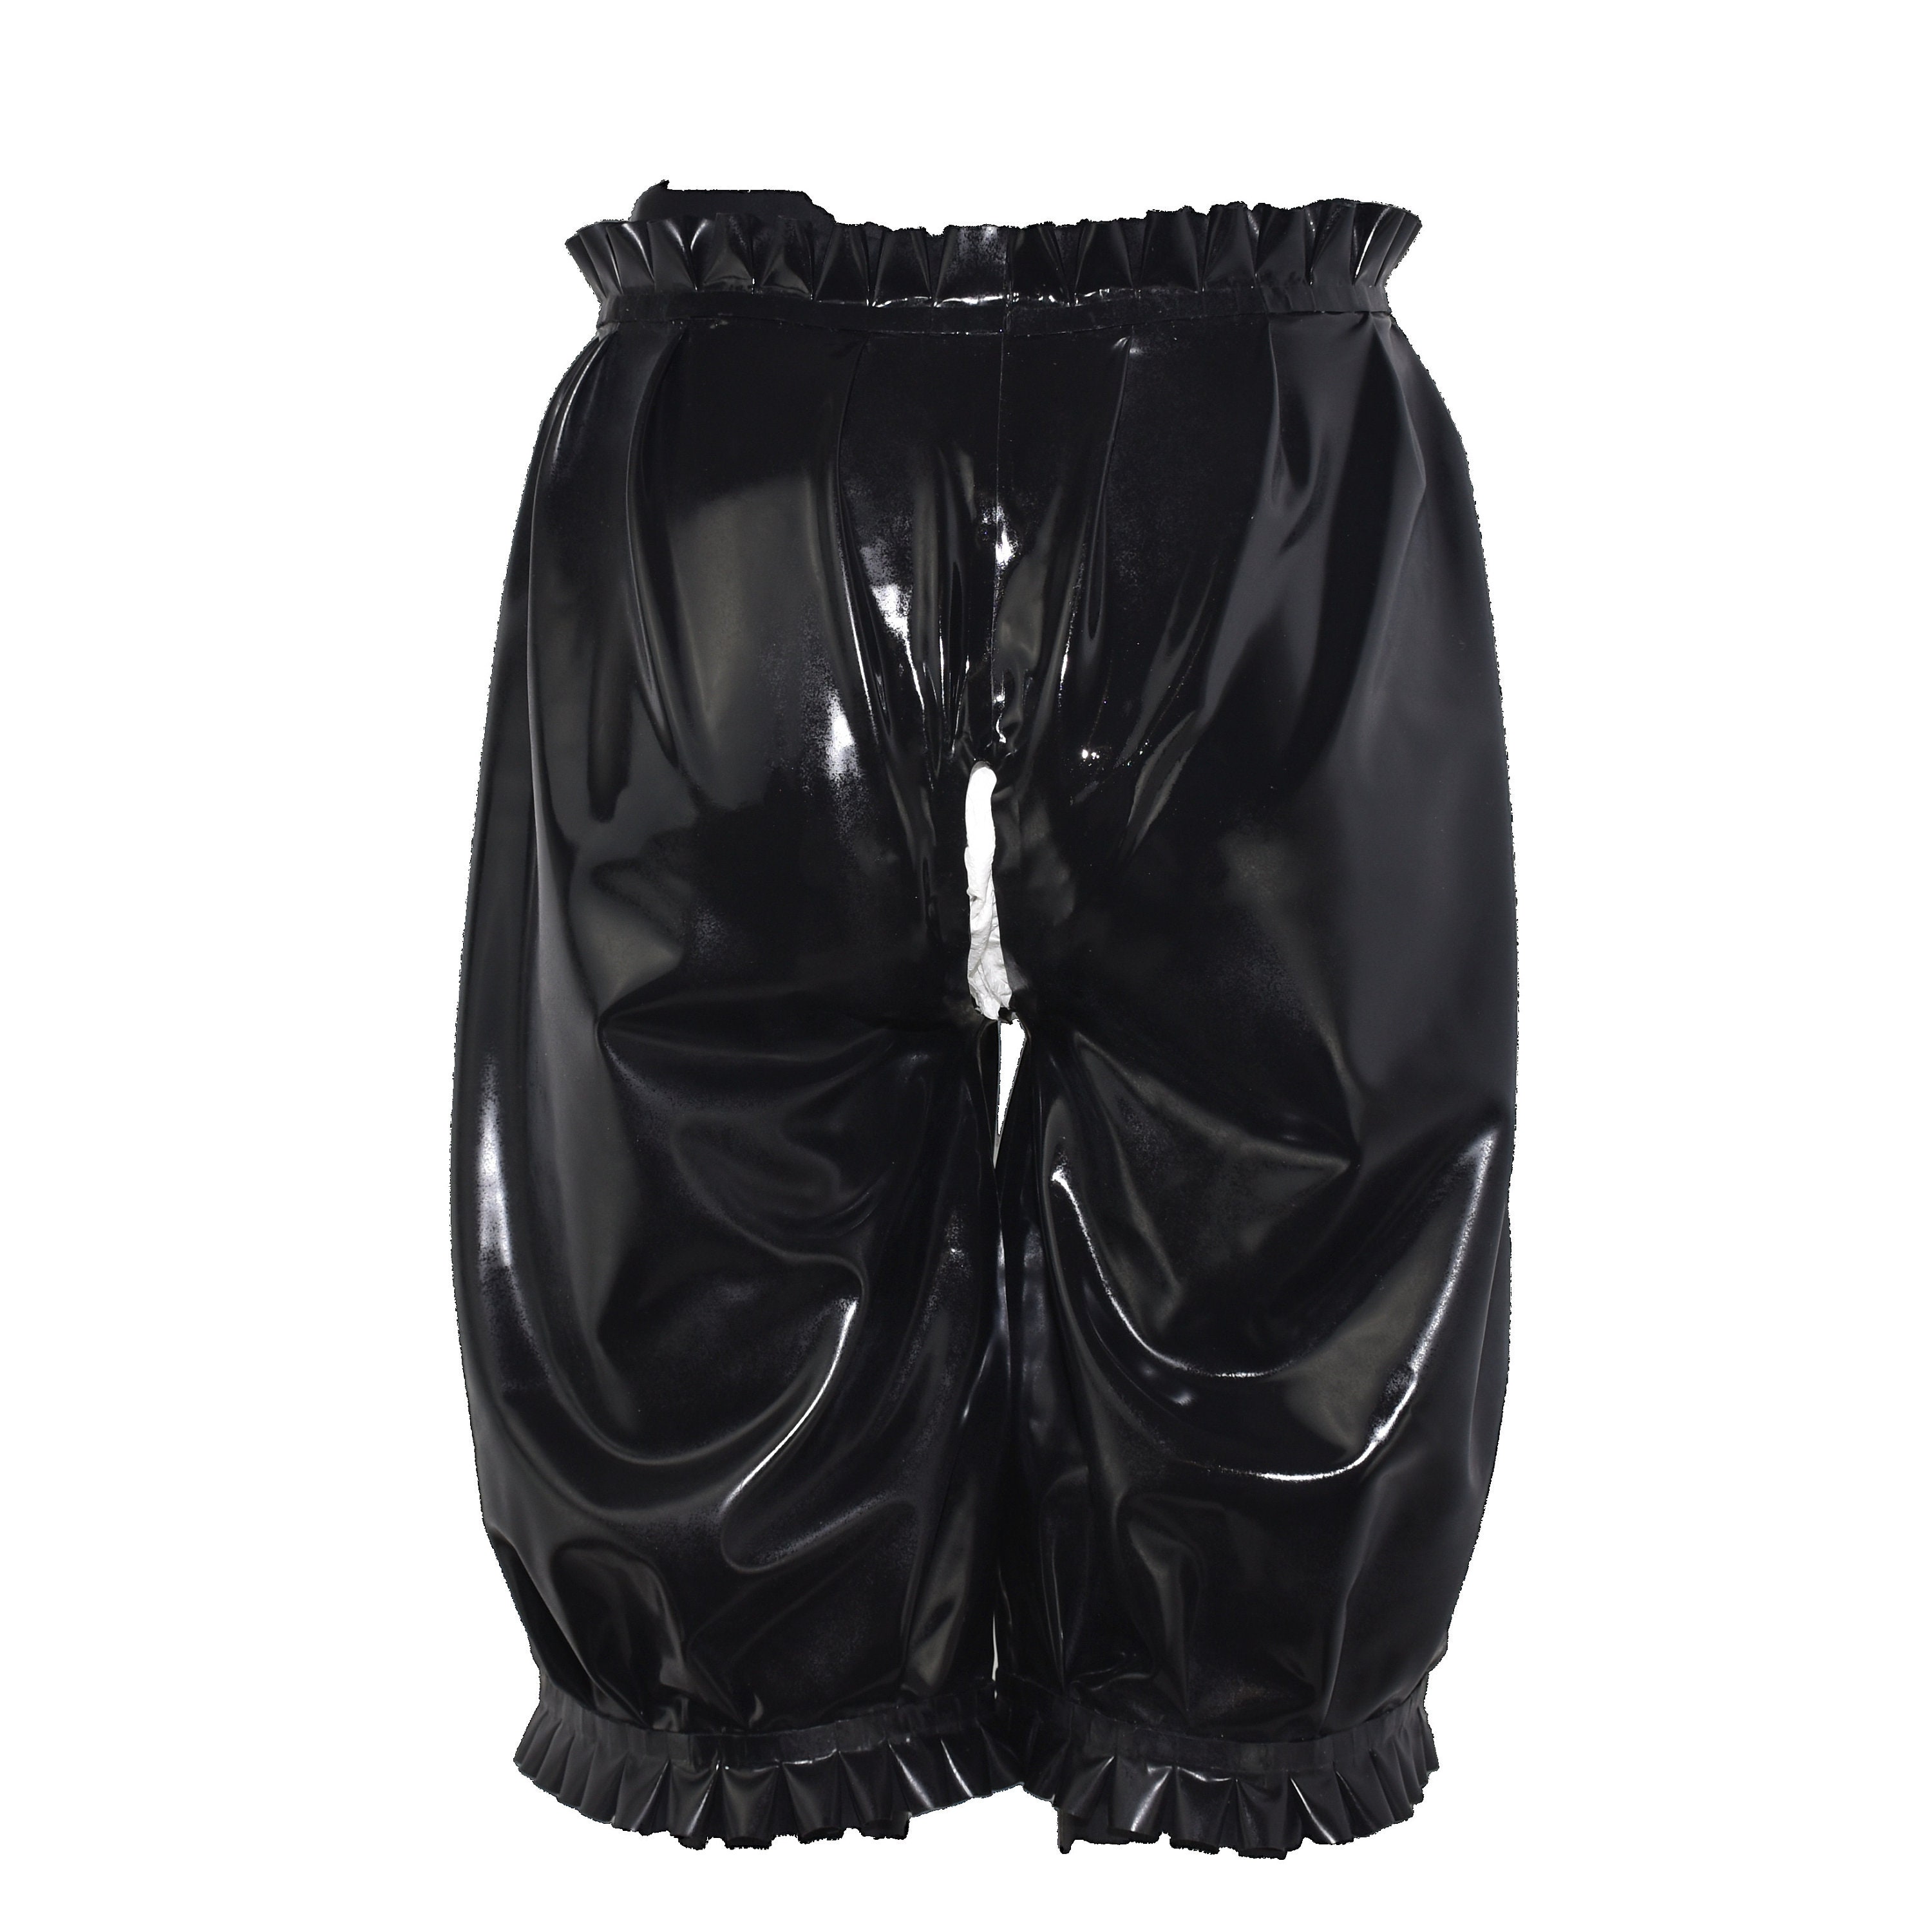 Latex Ruffle Pants Ouvert. in the Step Open Hand Made and Top - Etsy